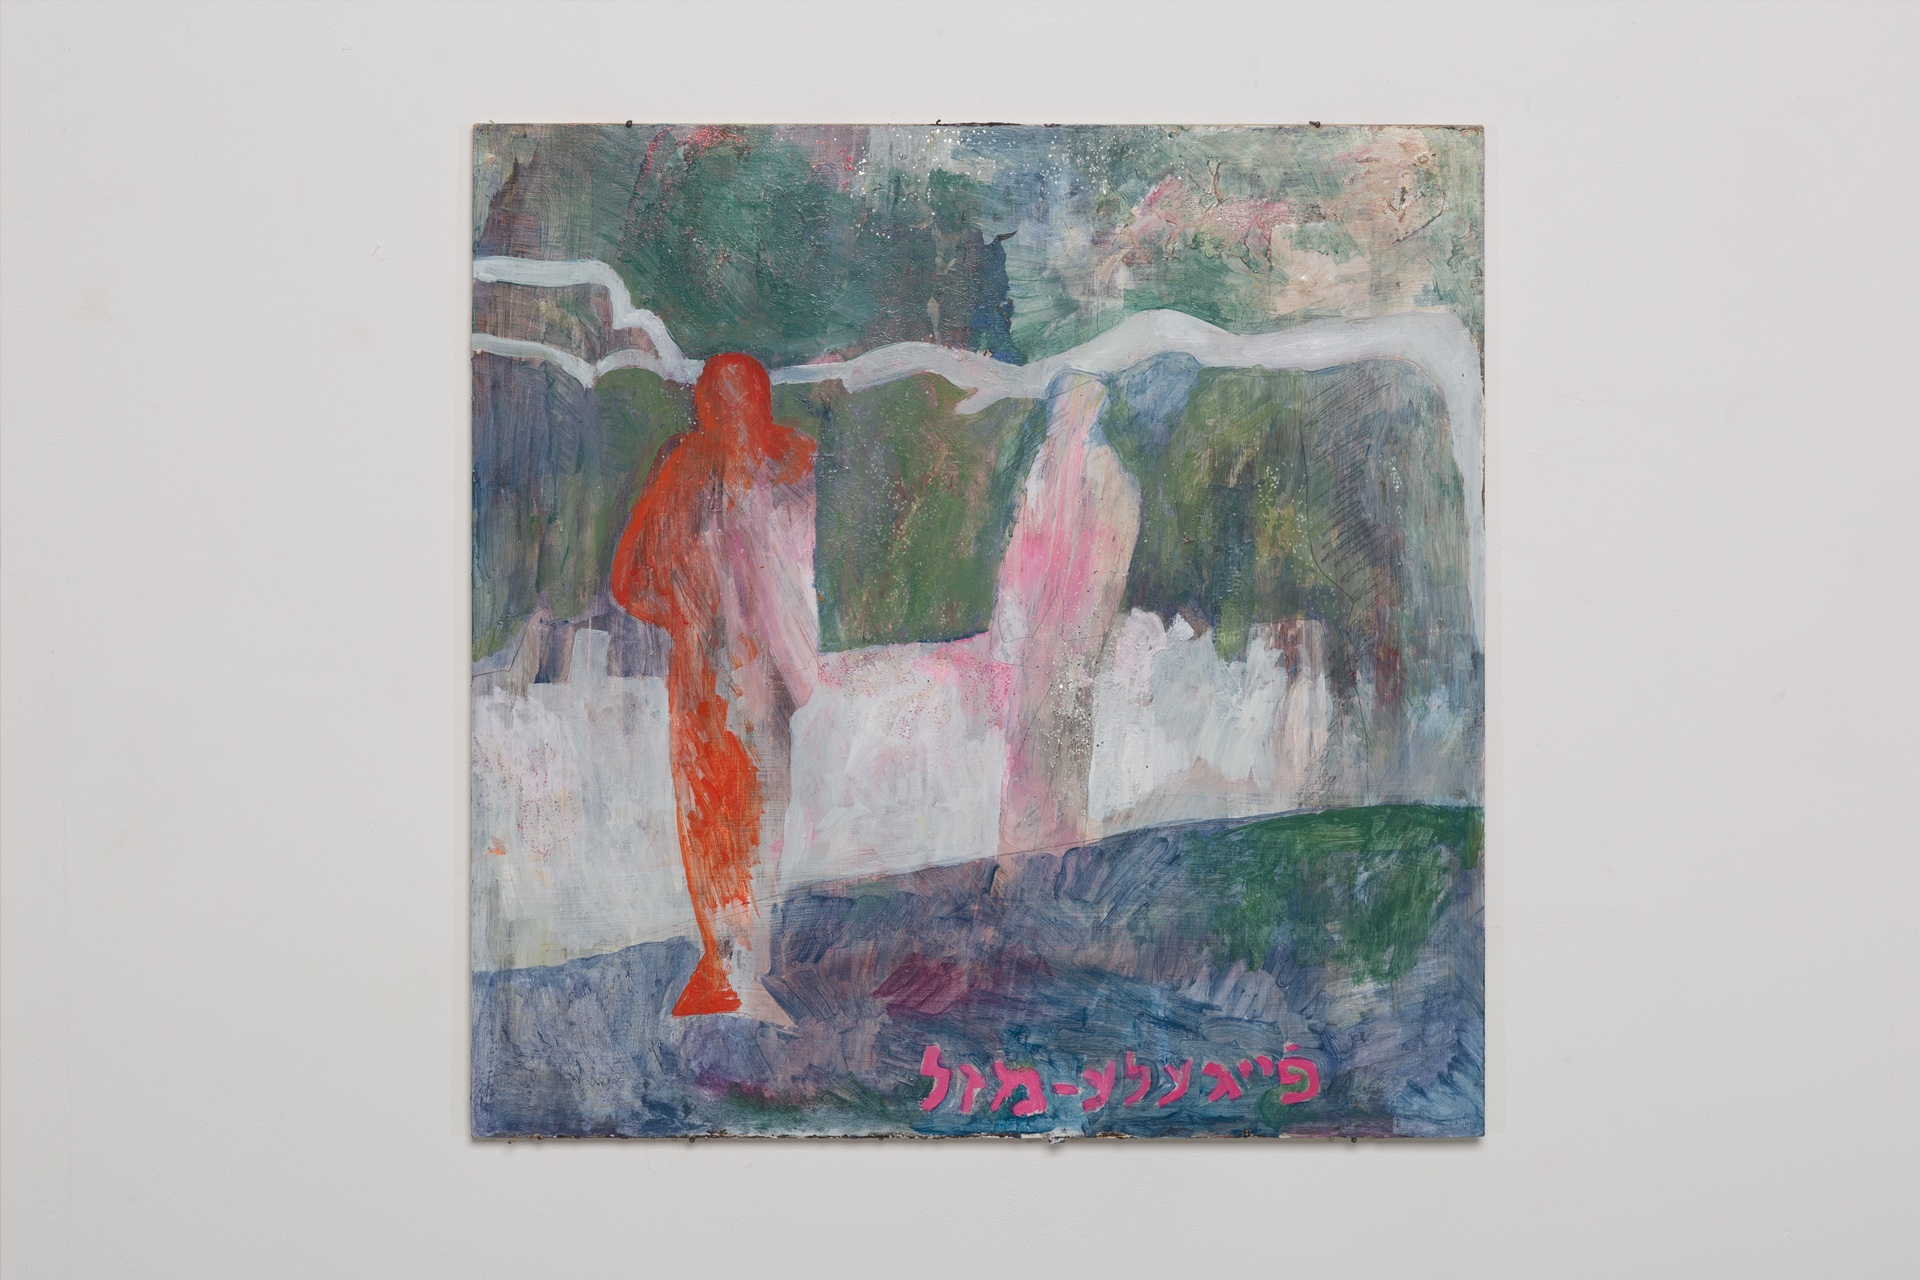 A square painting on a white wall of two figures in a landscape. The landscape is blue and green and white, with a white tree branch across the top of the image, while the figures are orange and pink. There is pink Yiddish text across the bottom of the ima